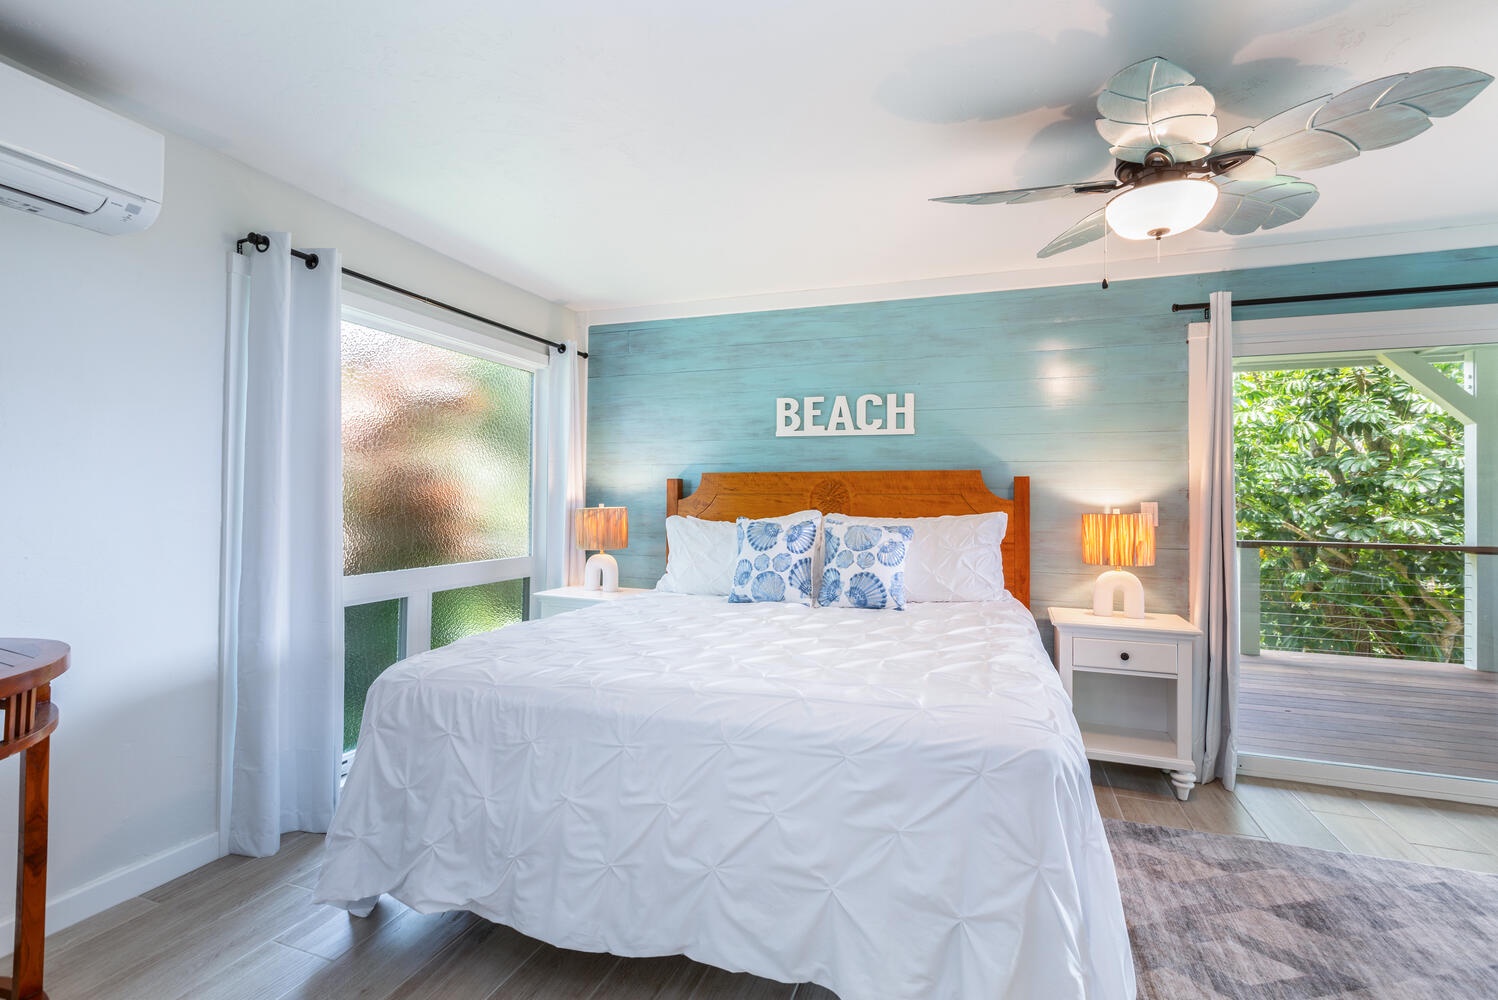 Princeville Vacation Rentals, Wai Lani - Guest Room 1 - Bright and cheerful beach-themed